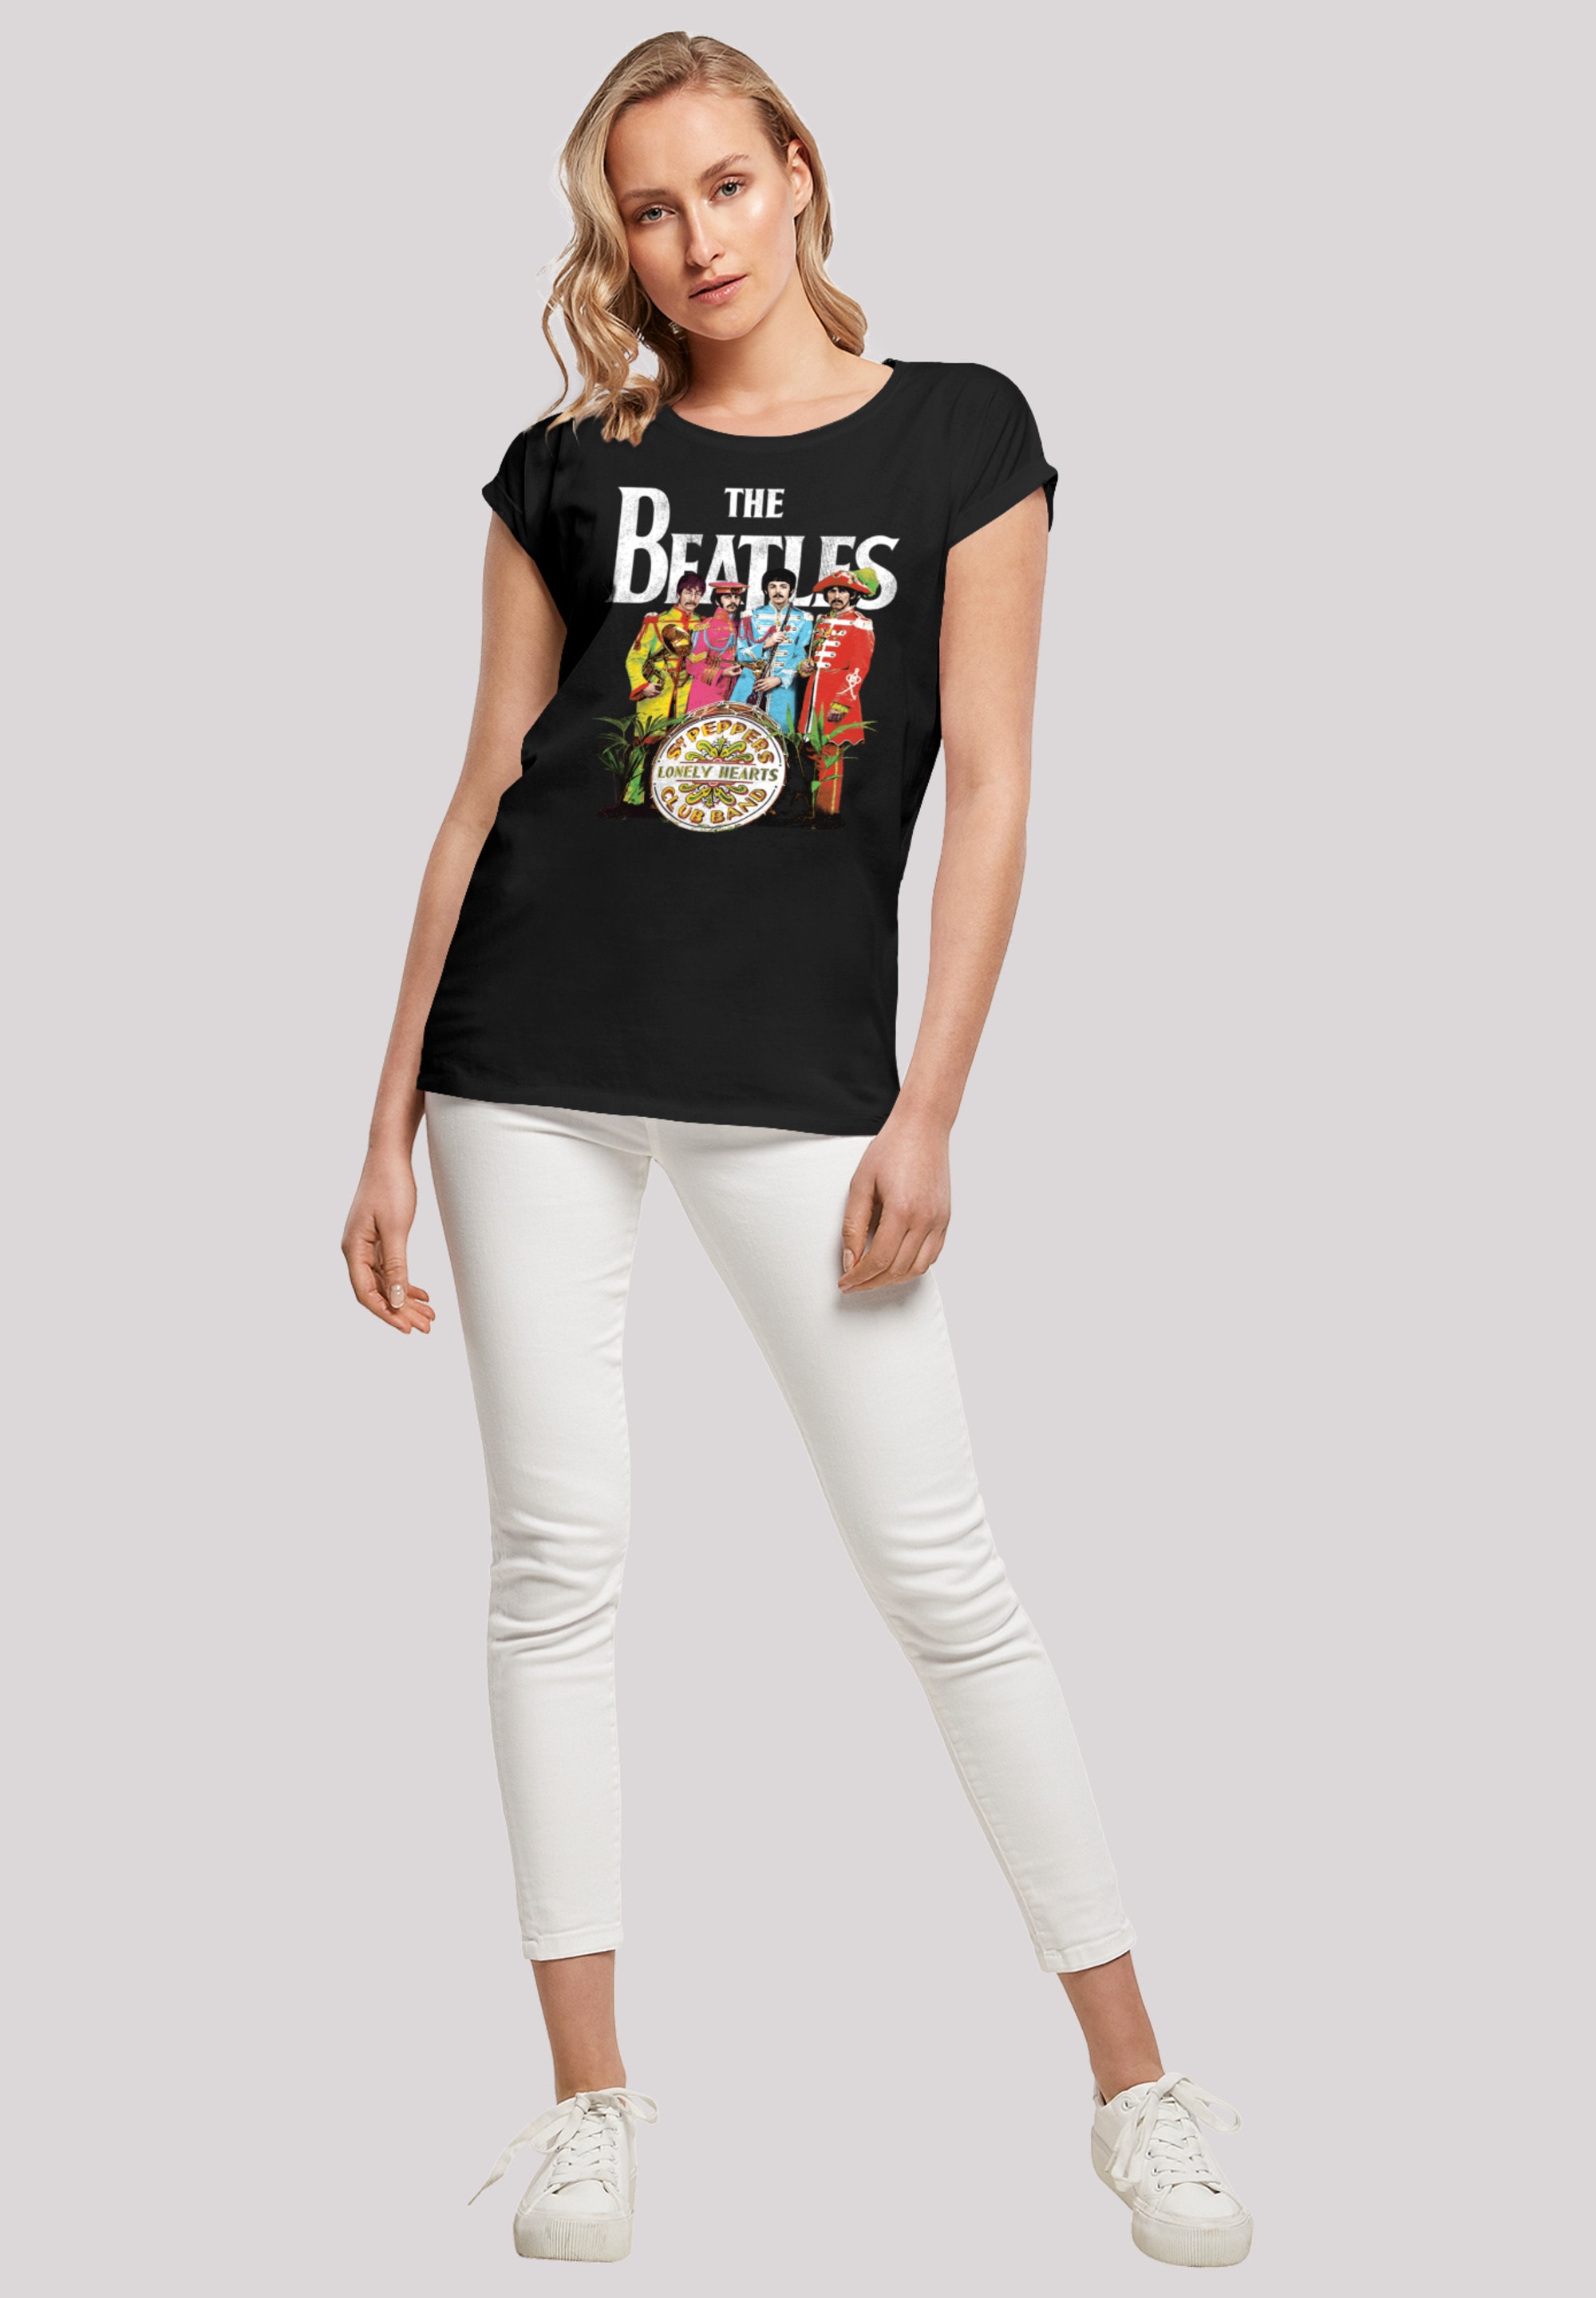 »F4NT4STIC Beatles T-Shirt T-Shirt F4NT4STIC The Band Pepper Black«, Sgt Keine online Angabe bei